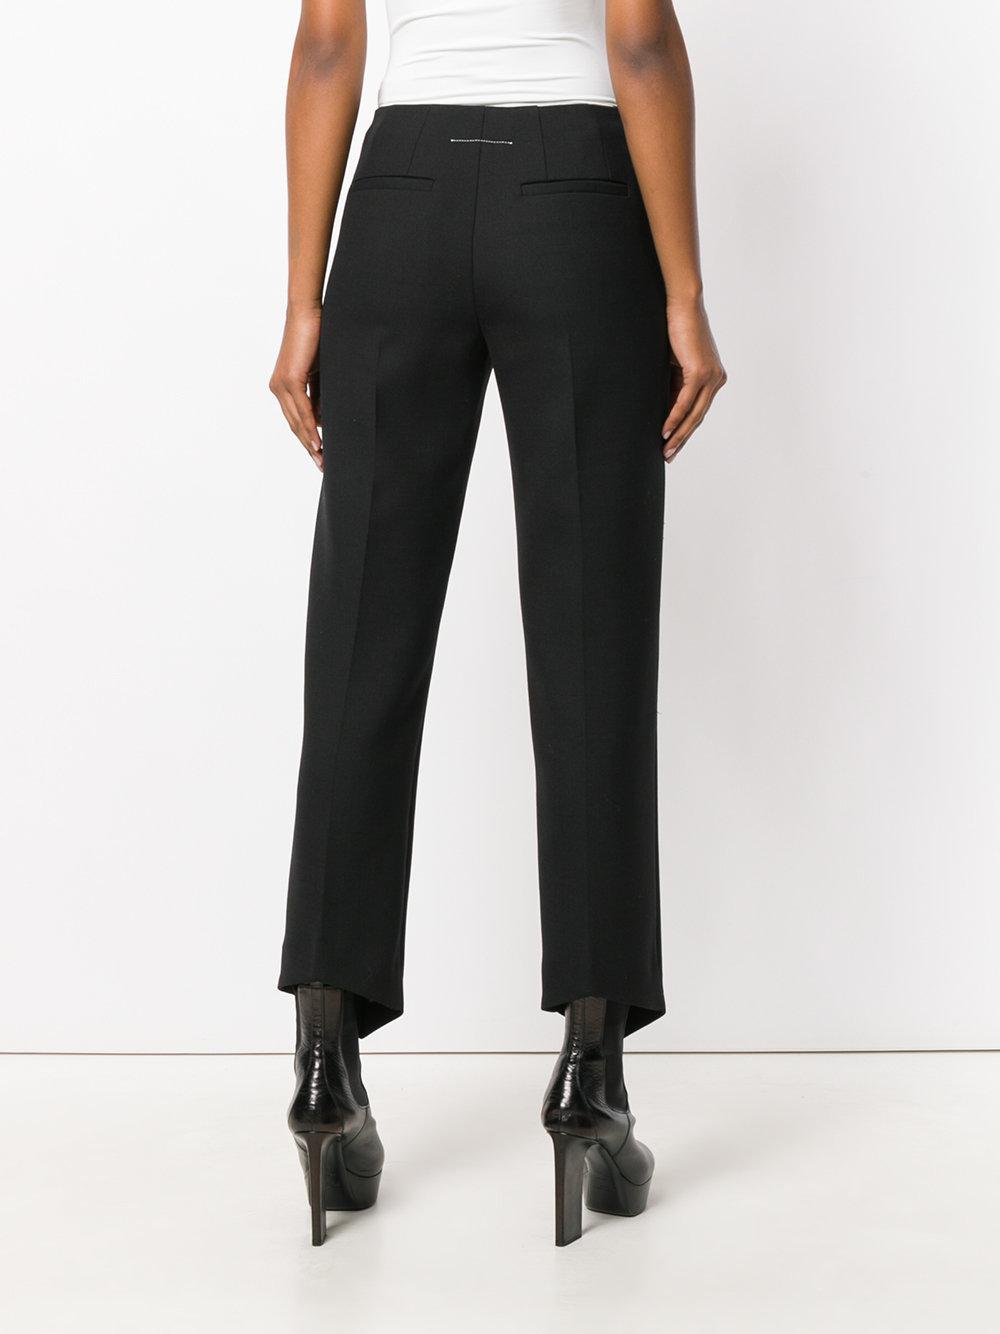 MM6 by Maison Martin Margiela Wool Whipcord Trousers in Black - Lyst